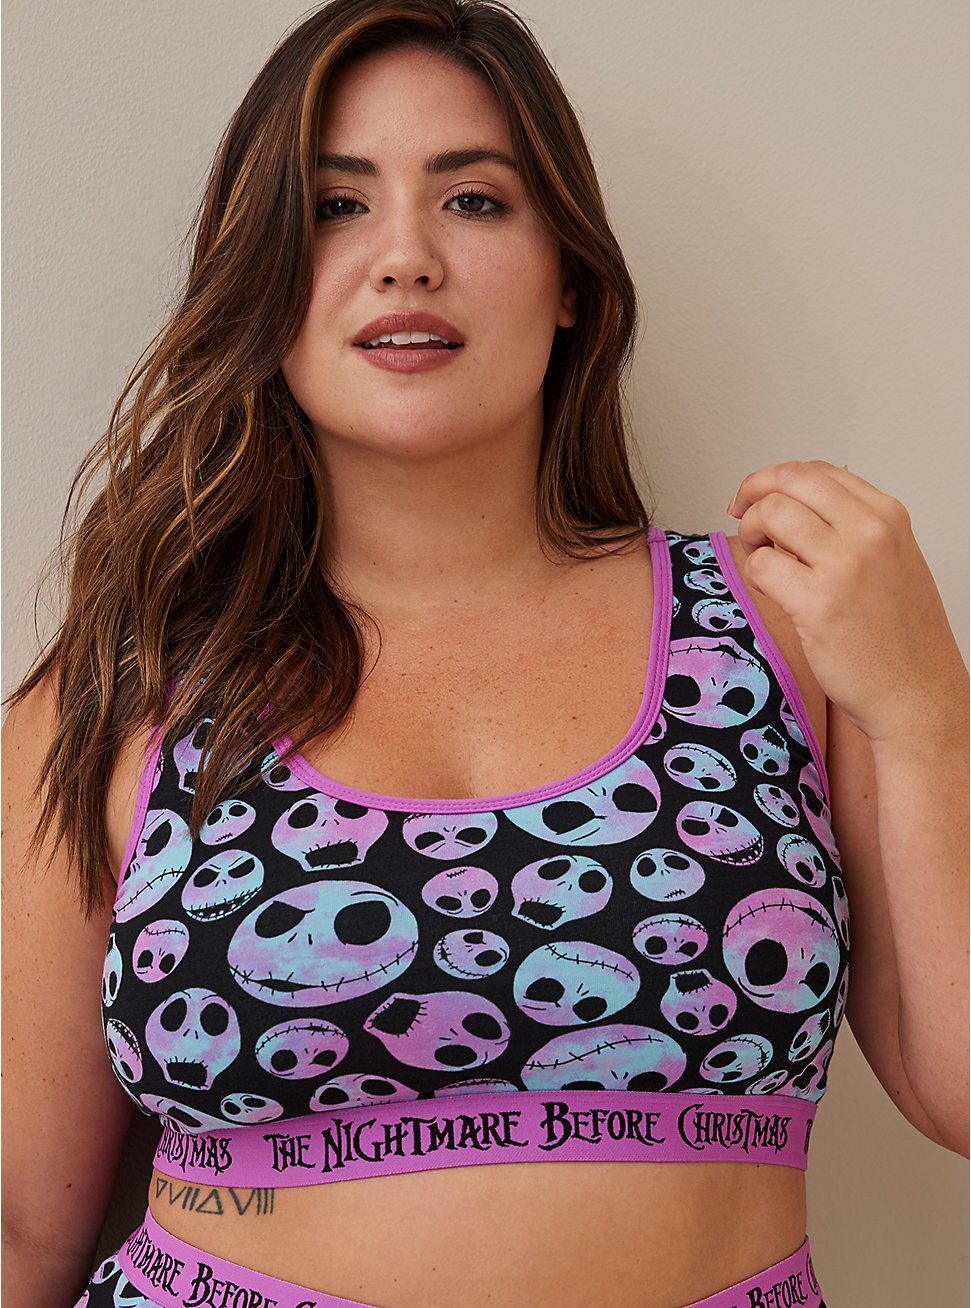 The Nightmare Before Christmas Scoop Neck Bralette - Cotton , MULTI COLOR, hi-res